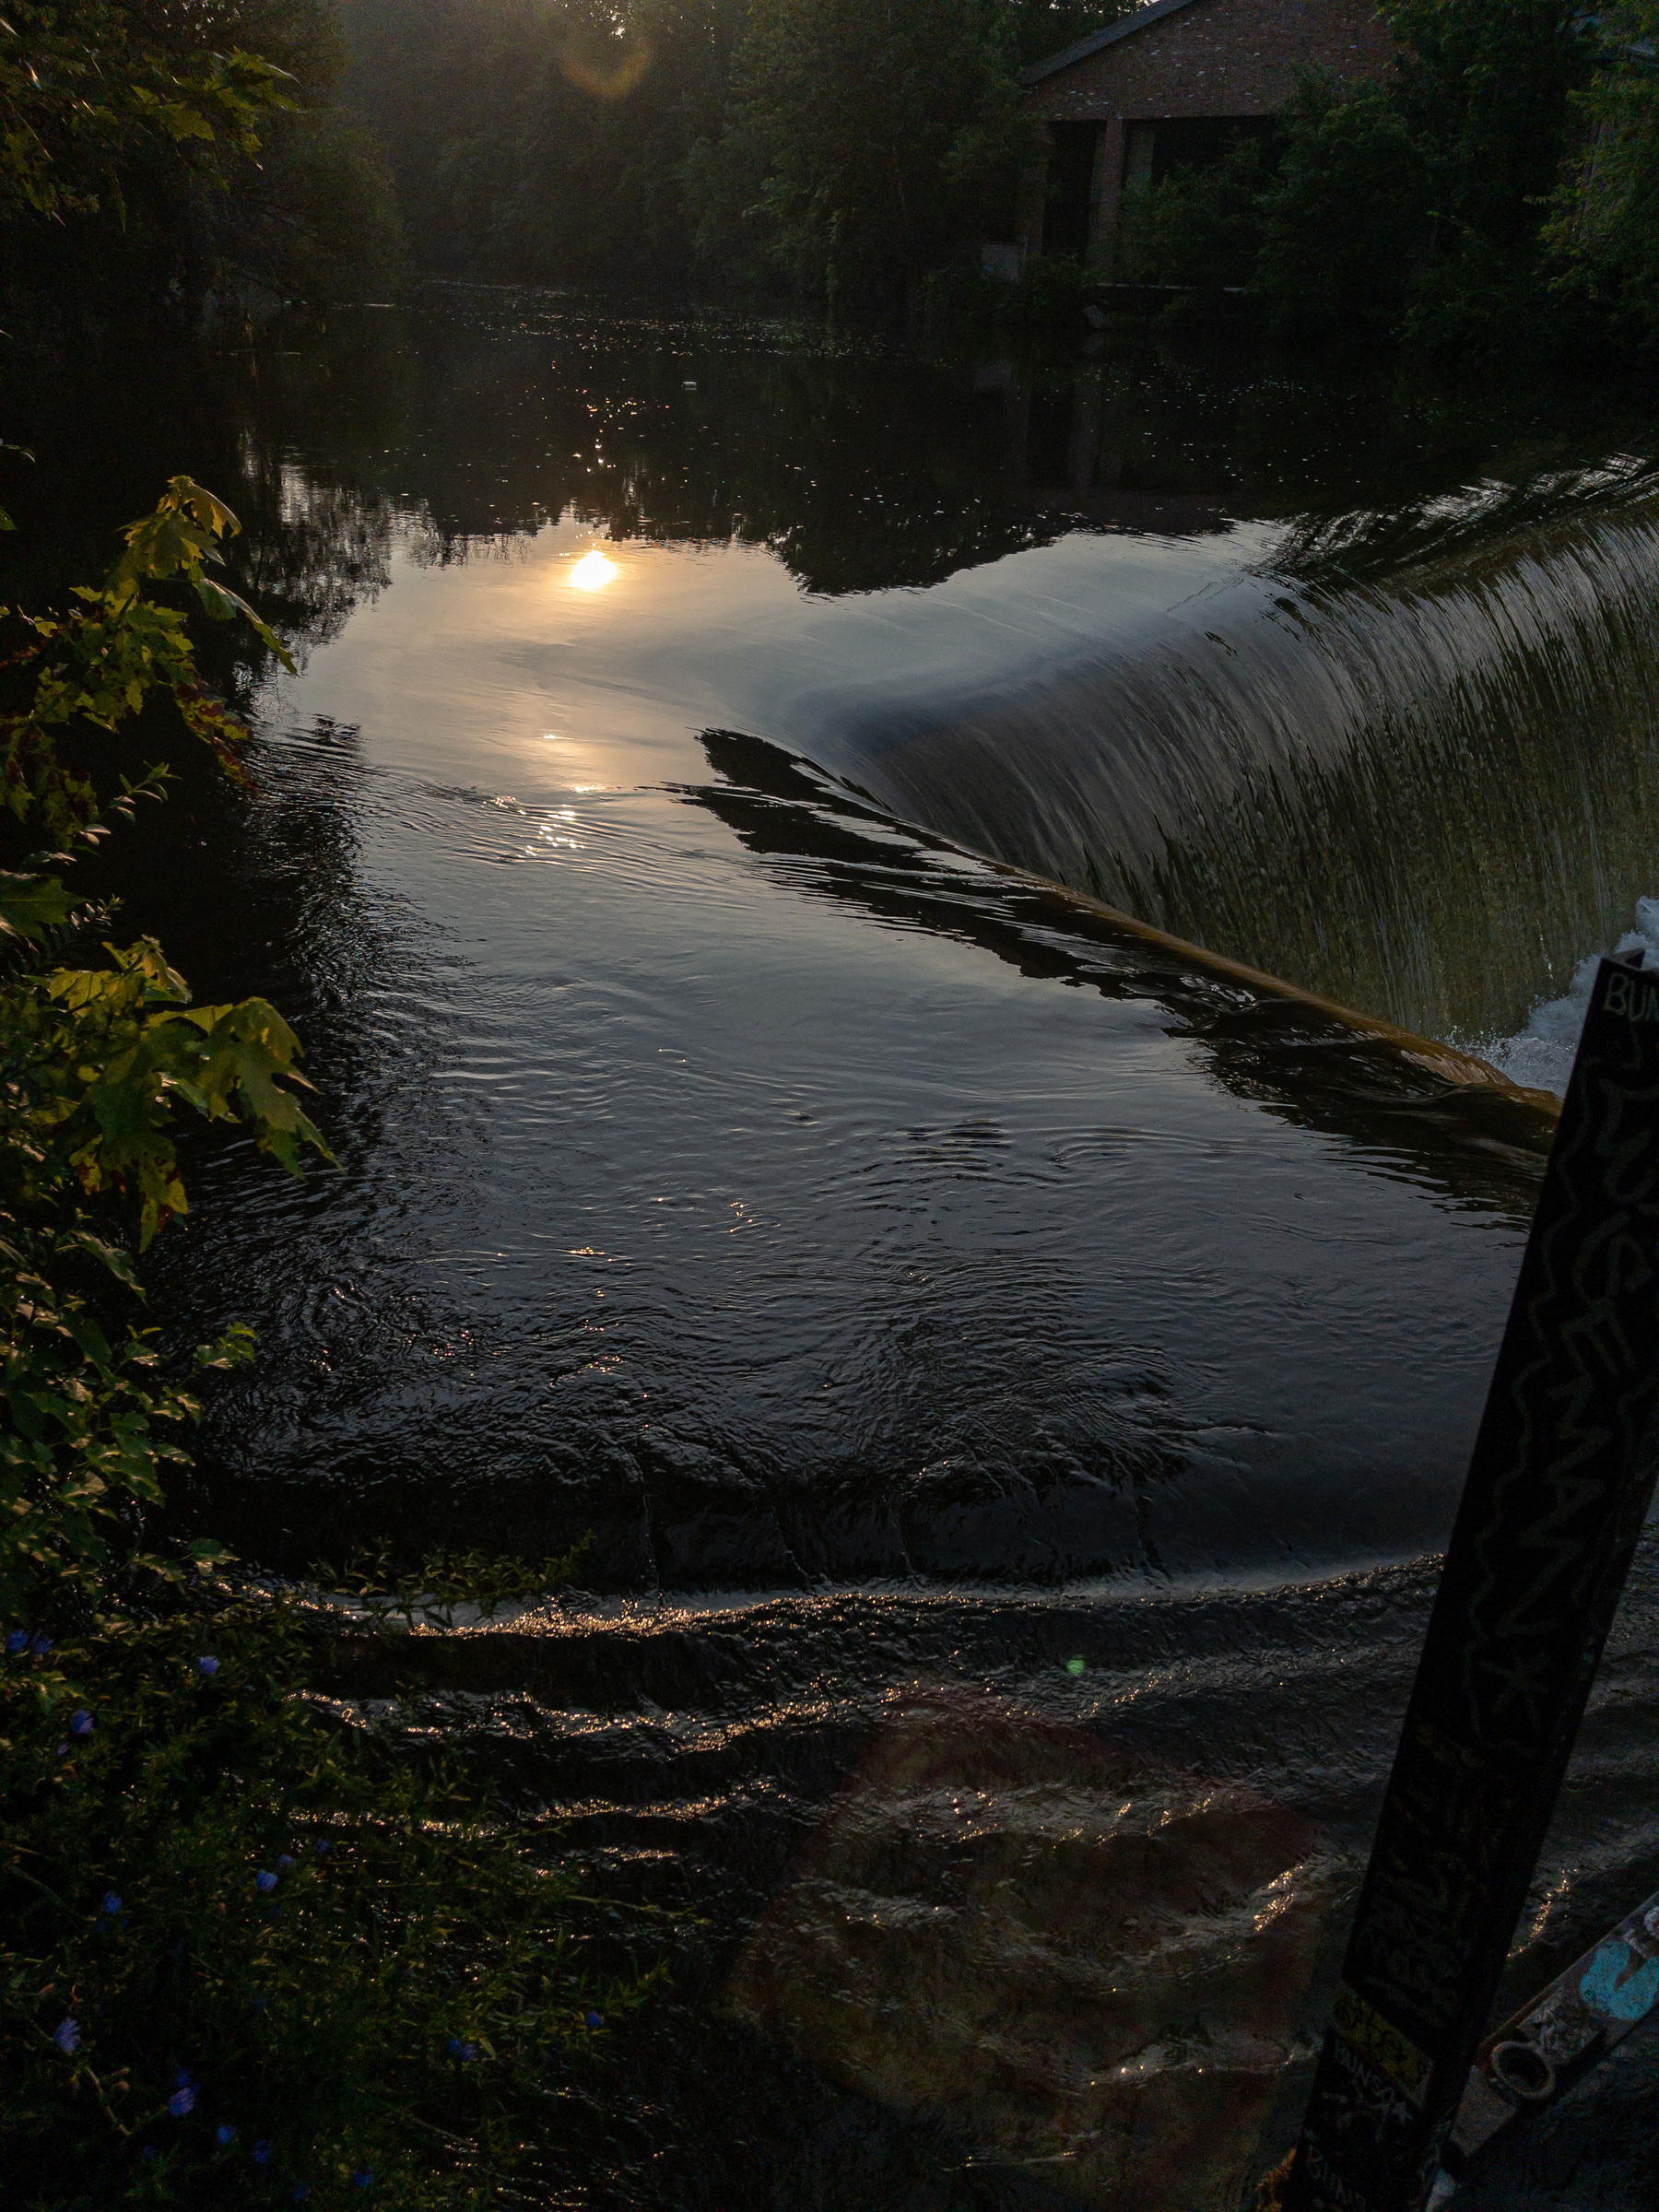 The morning sun reflected off the smooth surface of water in a stream, the drop off of a damn on the upper right side, ripples in the water on the bottom foreground, dark foliage and trees running up the left side and across the top.